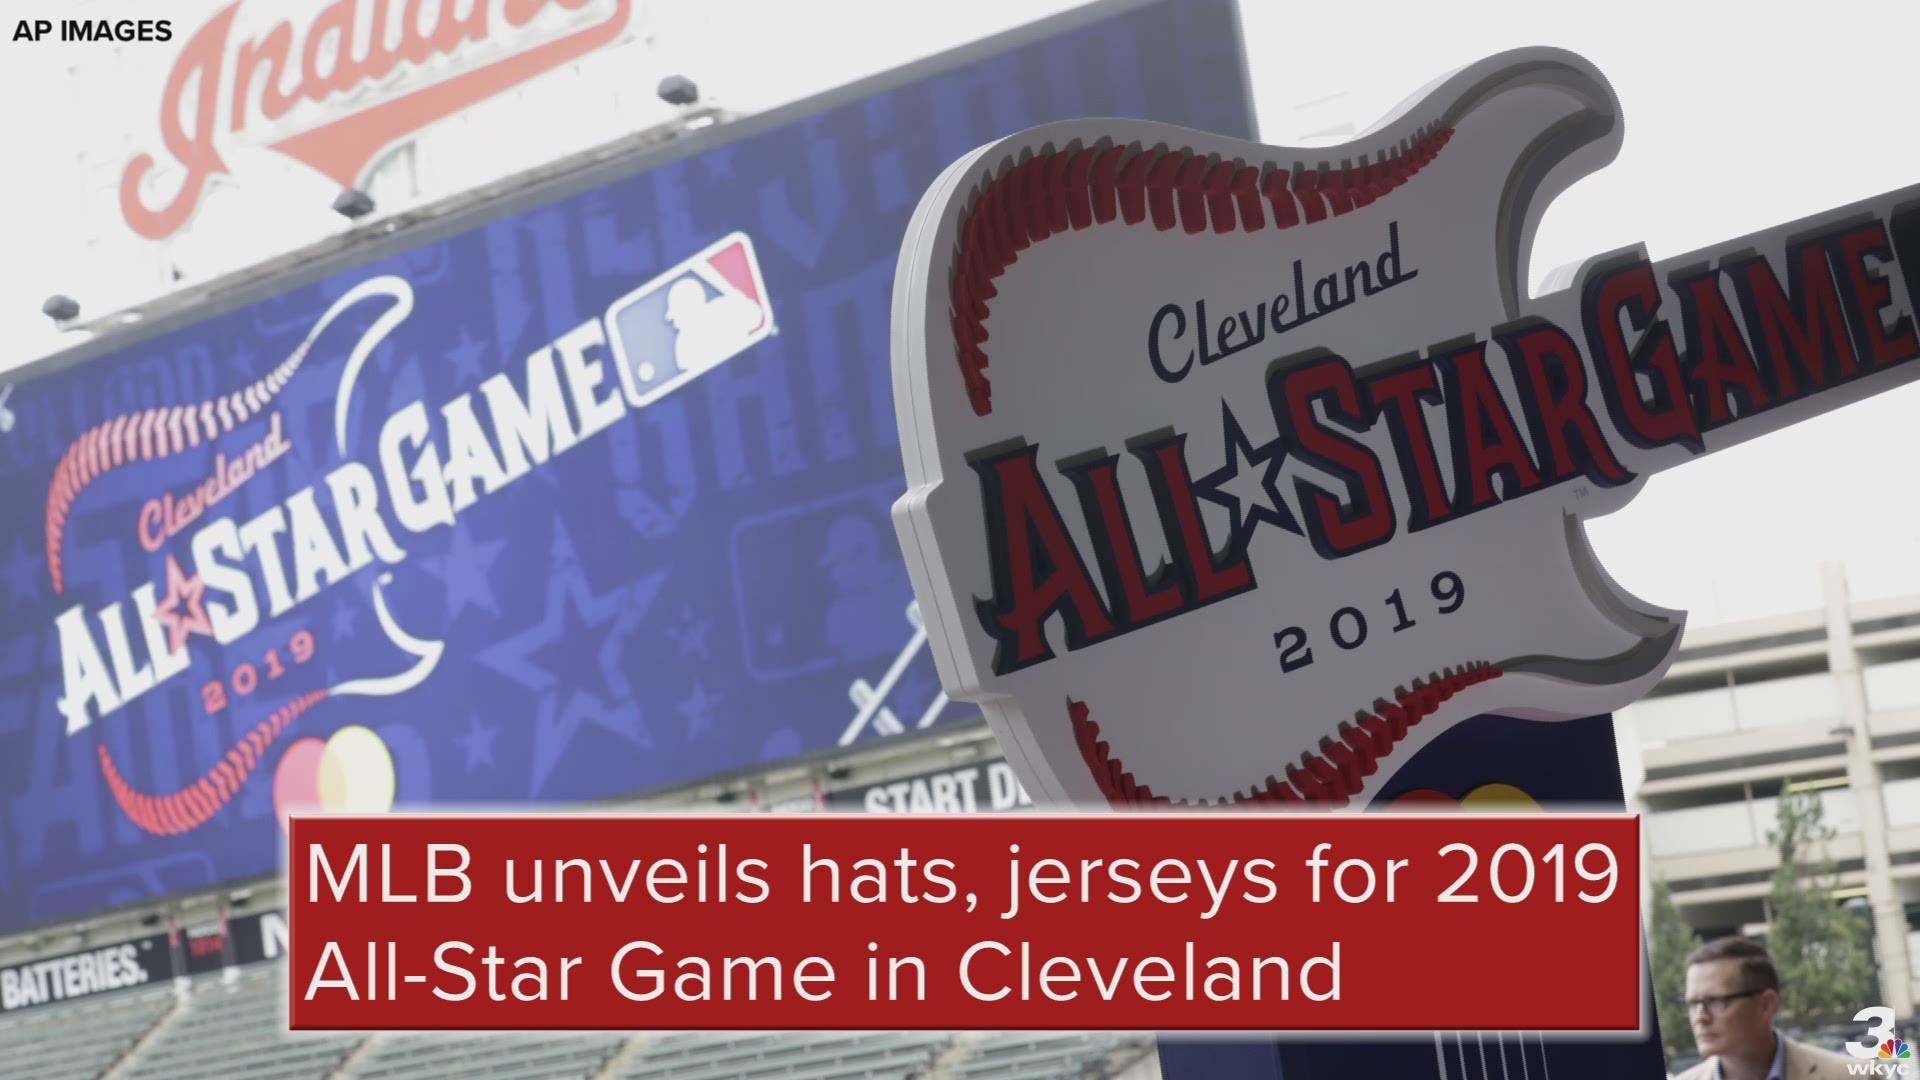 On Friday, Major League Baseball unveiled the caps and workout jerseys that will be worn during the 2019 MLB All-Star Game in Cleveland.